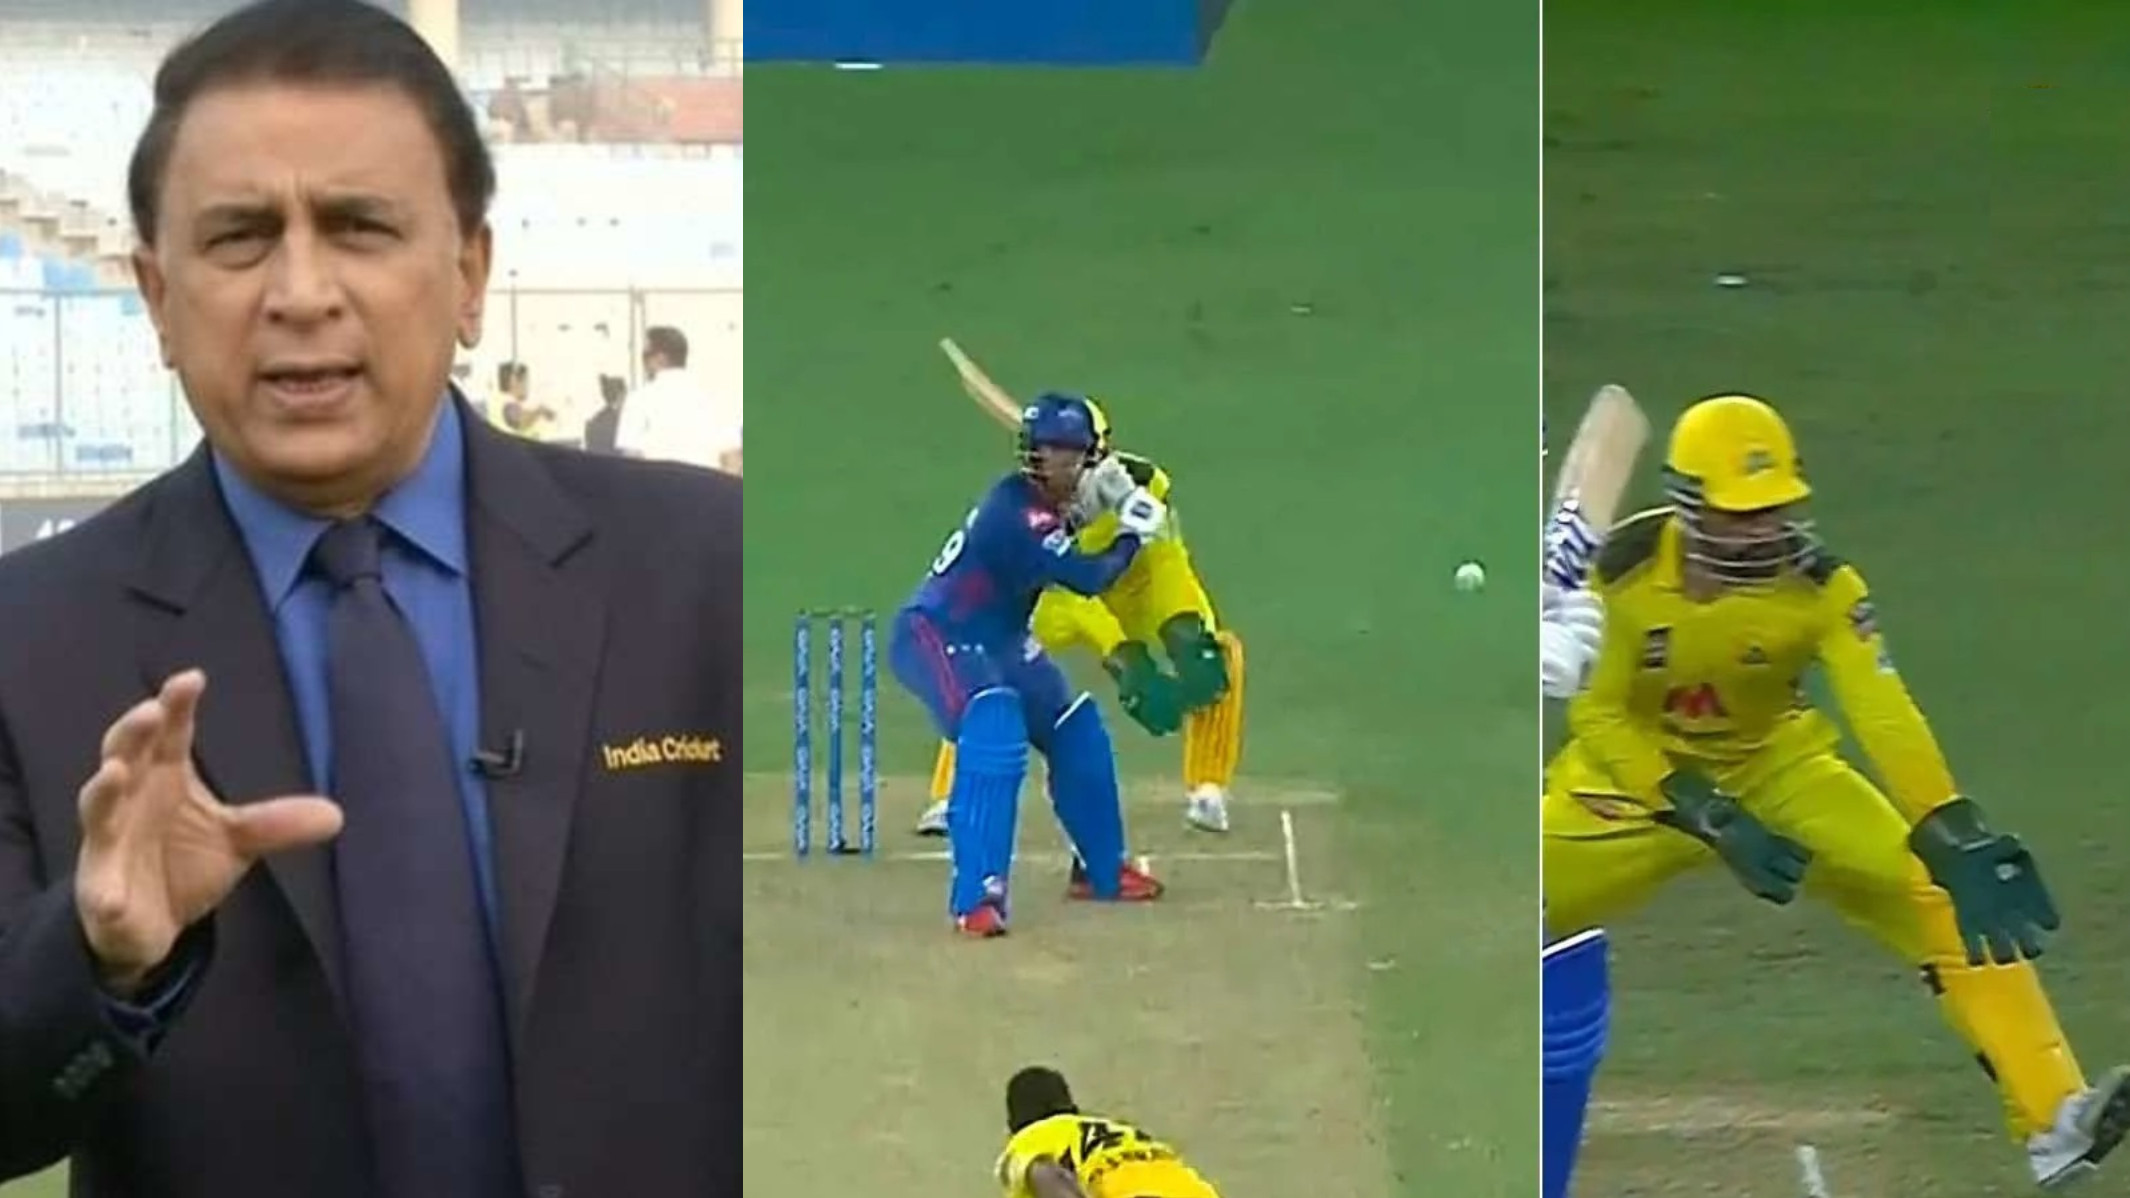 IPL 2021: Gavaskar slams controversial wide-ball call in DC-CSK game; says call could've been game changing